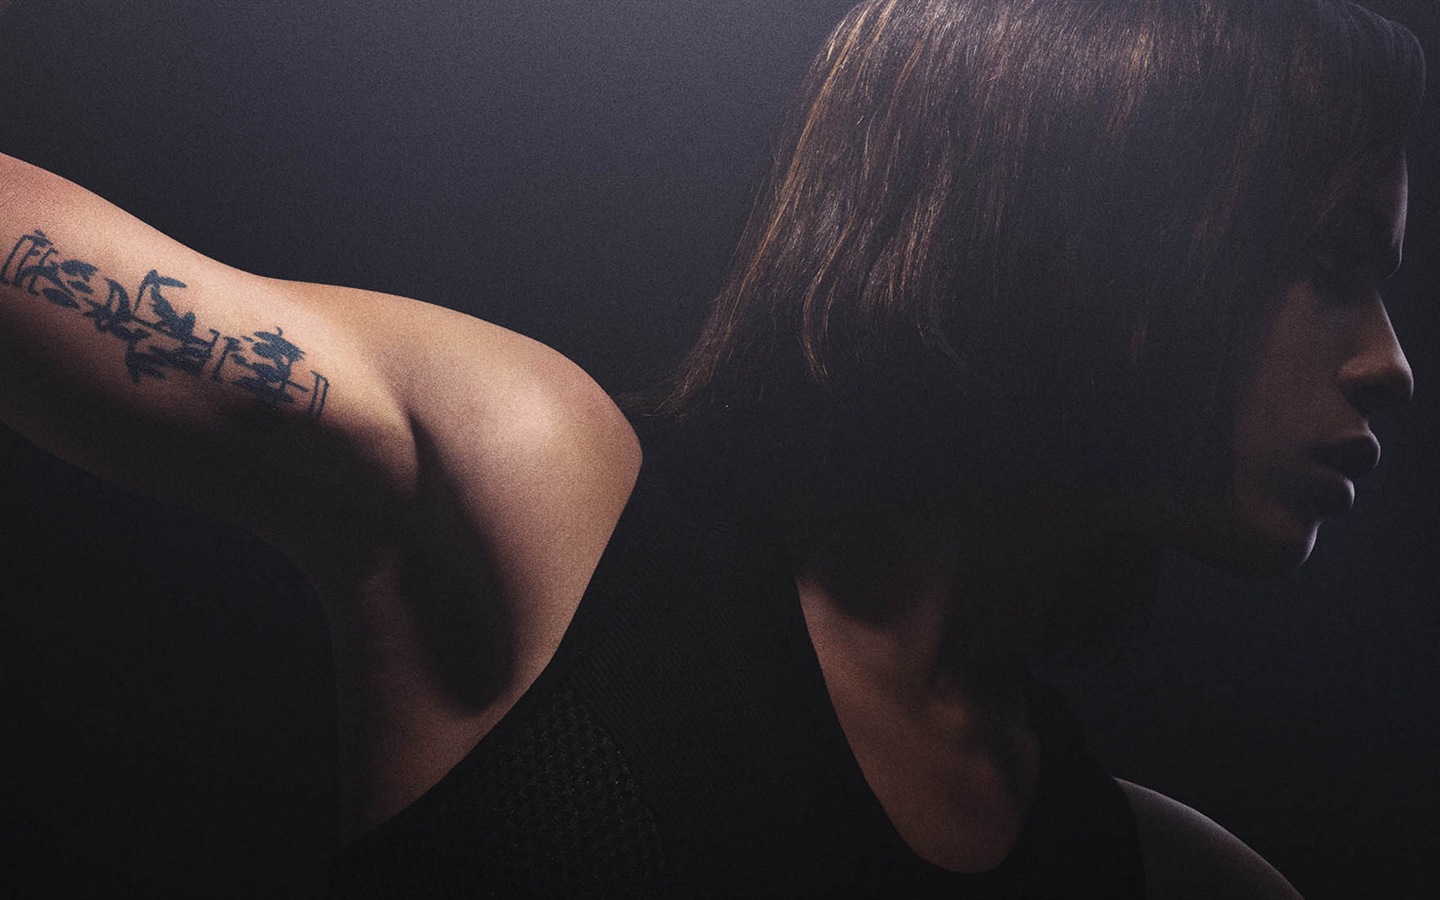 Divergent movie HD wallpapers #8 - 1440x900